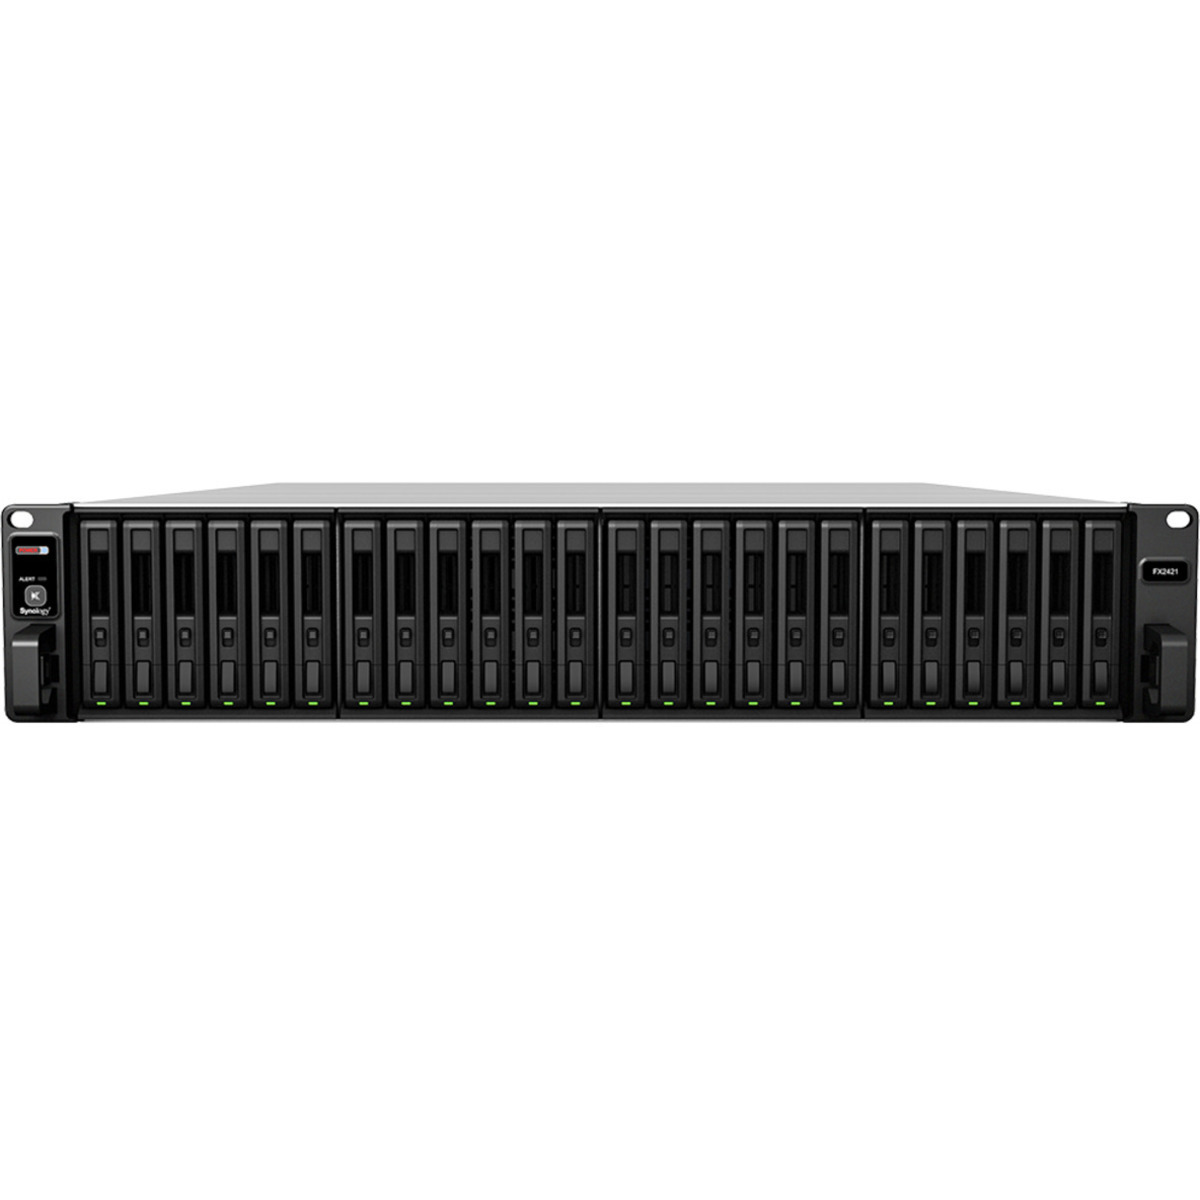 buy $6254 Synology FX2421 12tb RackMount Expansion Enclosure 24x500gb Samsung 870 EVO MZ-77E500BAM 2.5 SATA 6Gb/s SSD CONSUMER Class Drives Installed - Burn-In Tested - nas headquarters buy network attached storage server device das new raid-5 free shipping usa christmas new year holiday sale FX2421